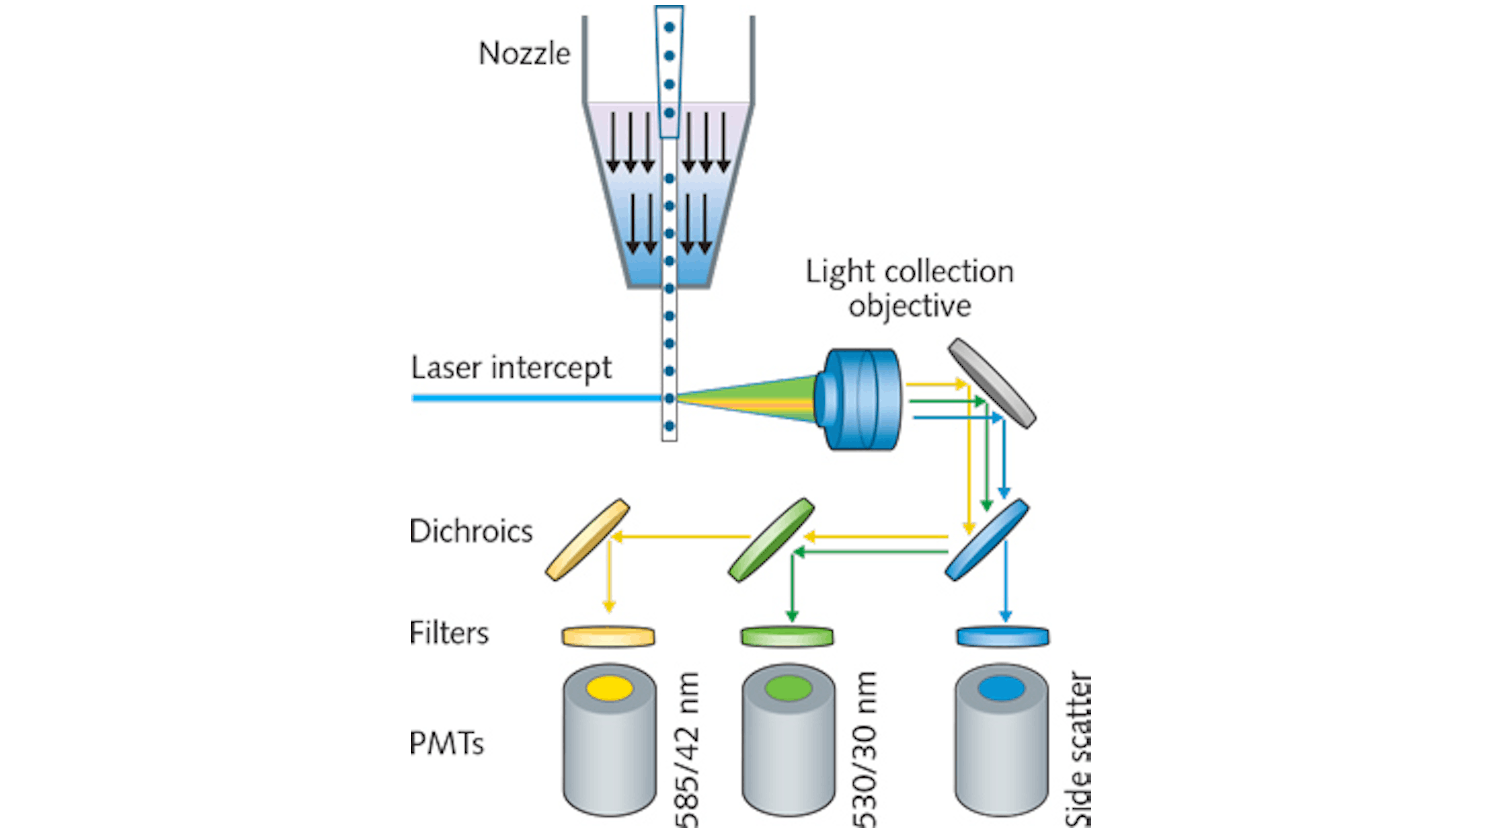 FIGURE 1. A schematic shows the operation of a basic flow cytometer. Cells are introduced into a laser beam in a liquid stream by hydrodynamic focusing, either with a nozzle or enclosed quartz flow cell. Signal collection optics collect excited fluorescence signals, which are steered to PMTs using dichroic mirrors and narrow bandpass filters. Modern instruments can utilize fiber optics for both laser delivery and signal collection.